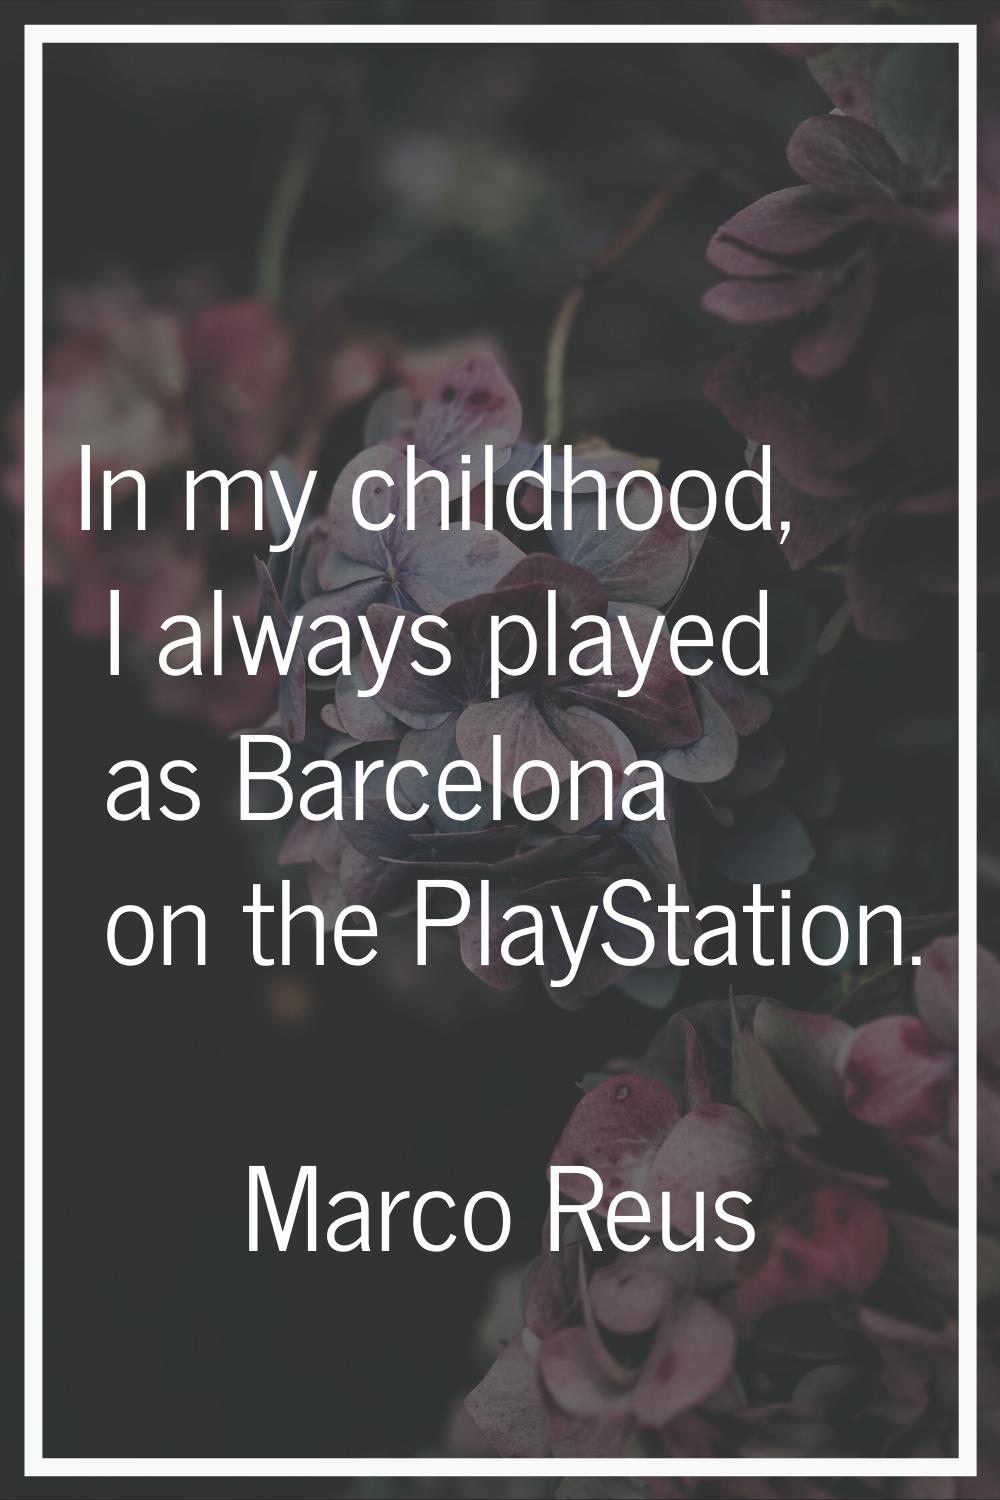 In my childhood, I always played as Barcelona on the PlayStation.